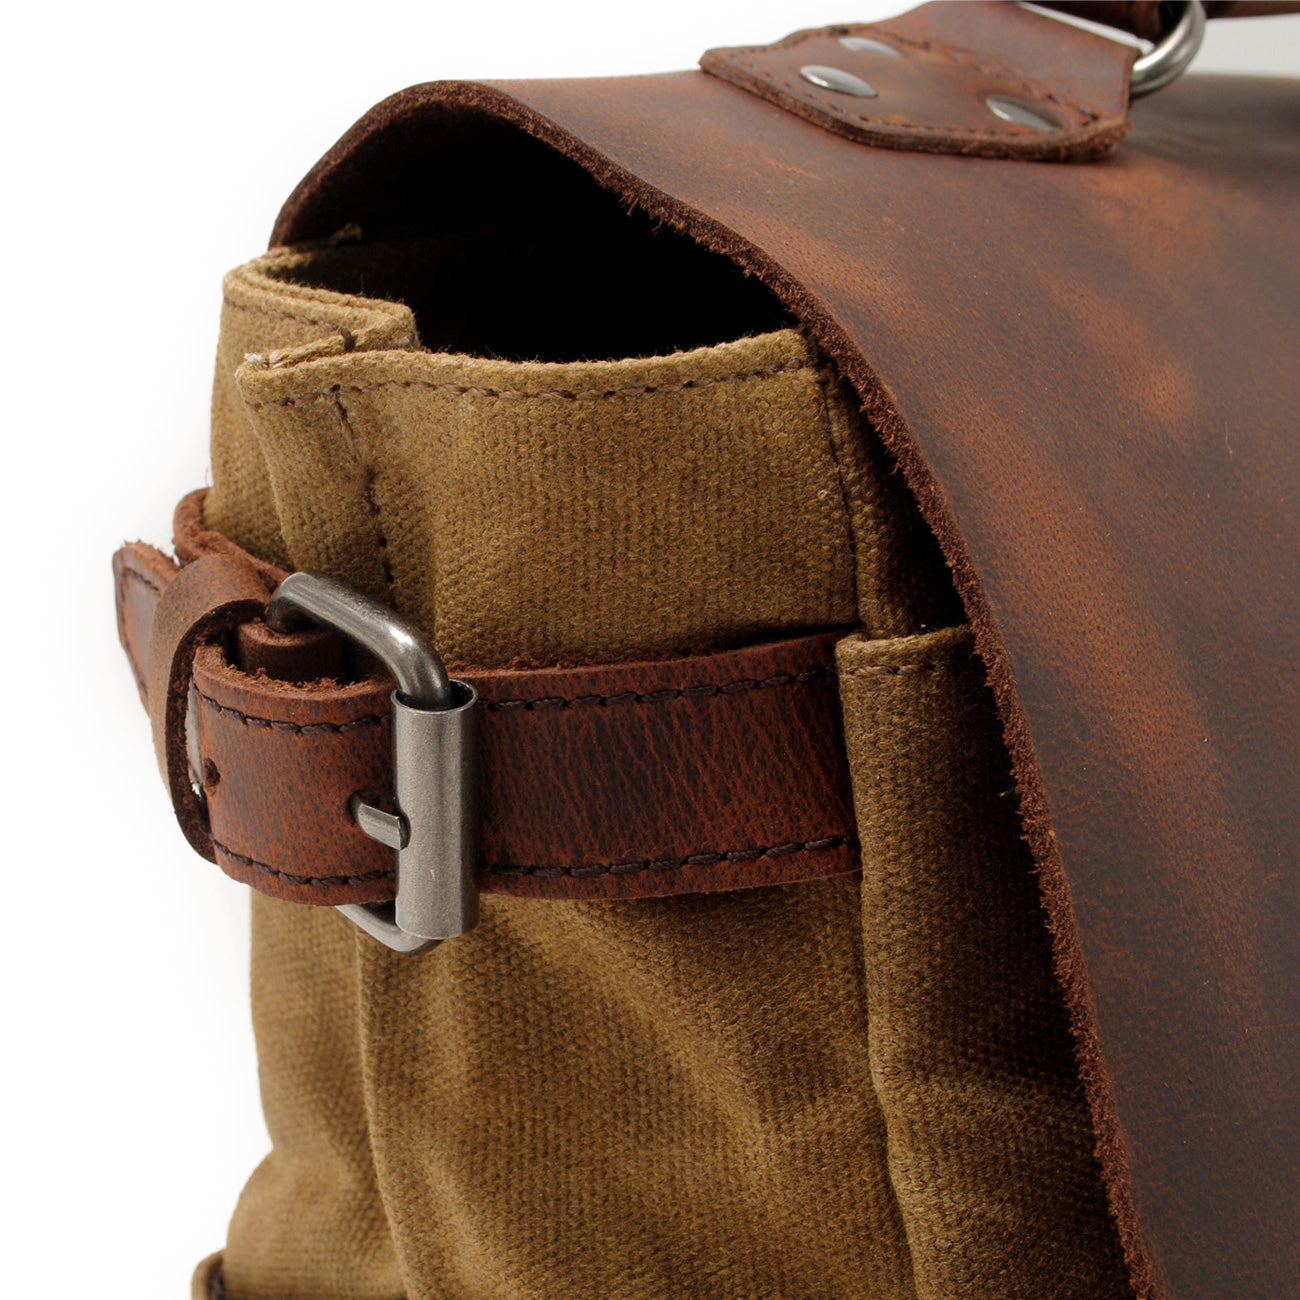 Vintage-Waxed-Canvas-and-Crazy-Horse-Leather-Laptop-Messenger-Bag-Khaki-i7bags-12